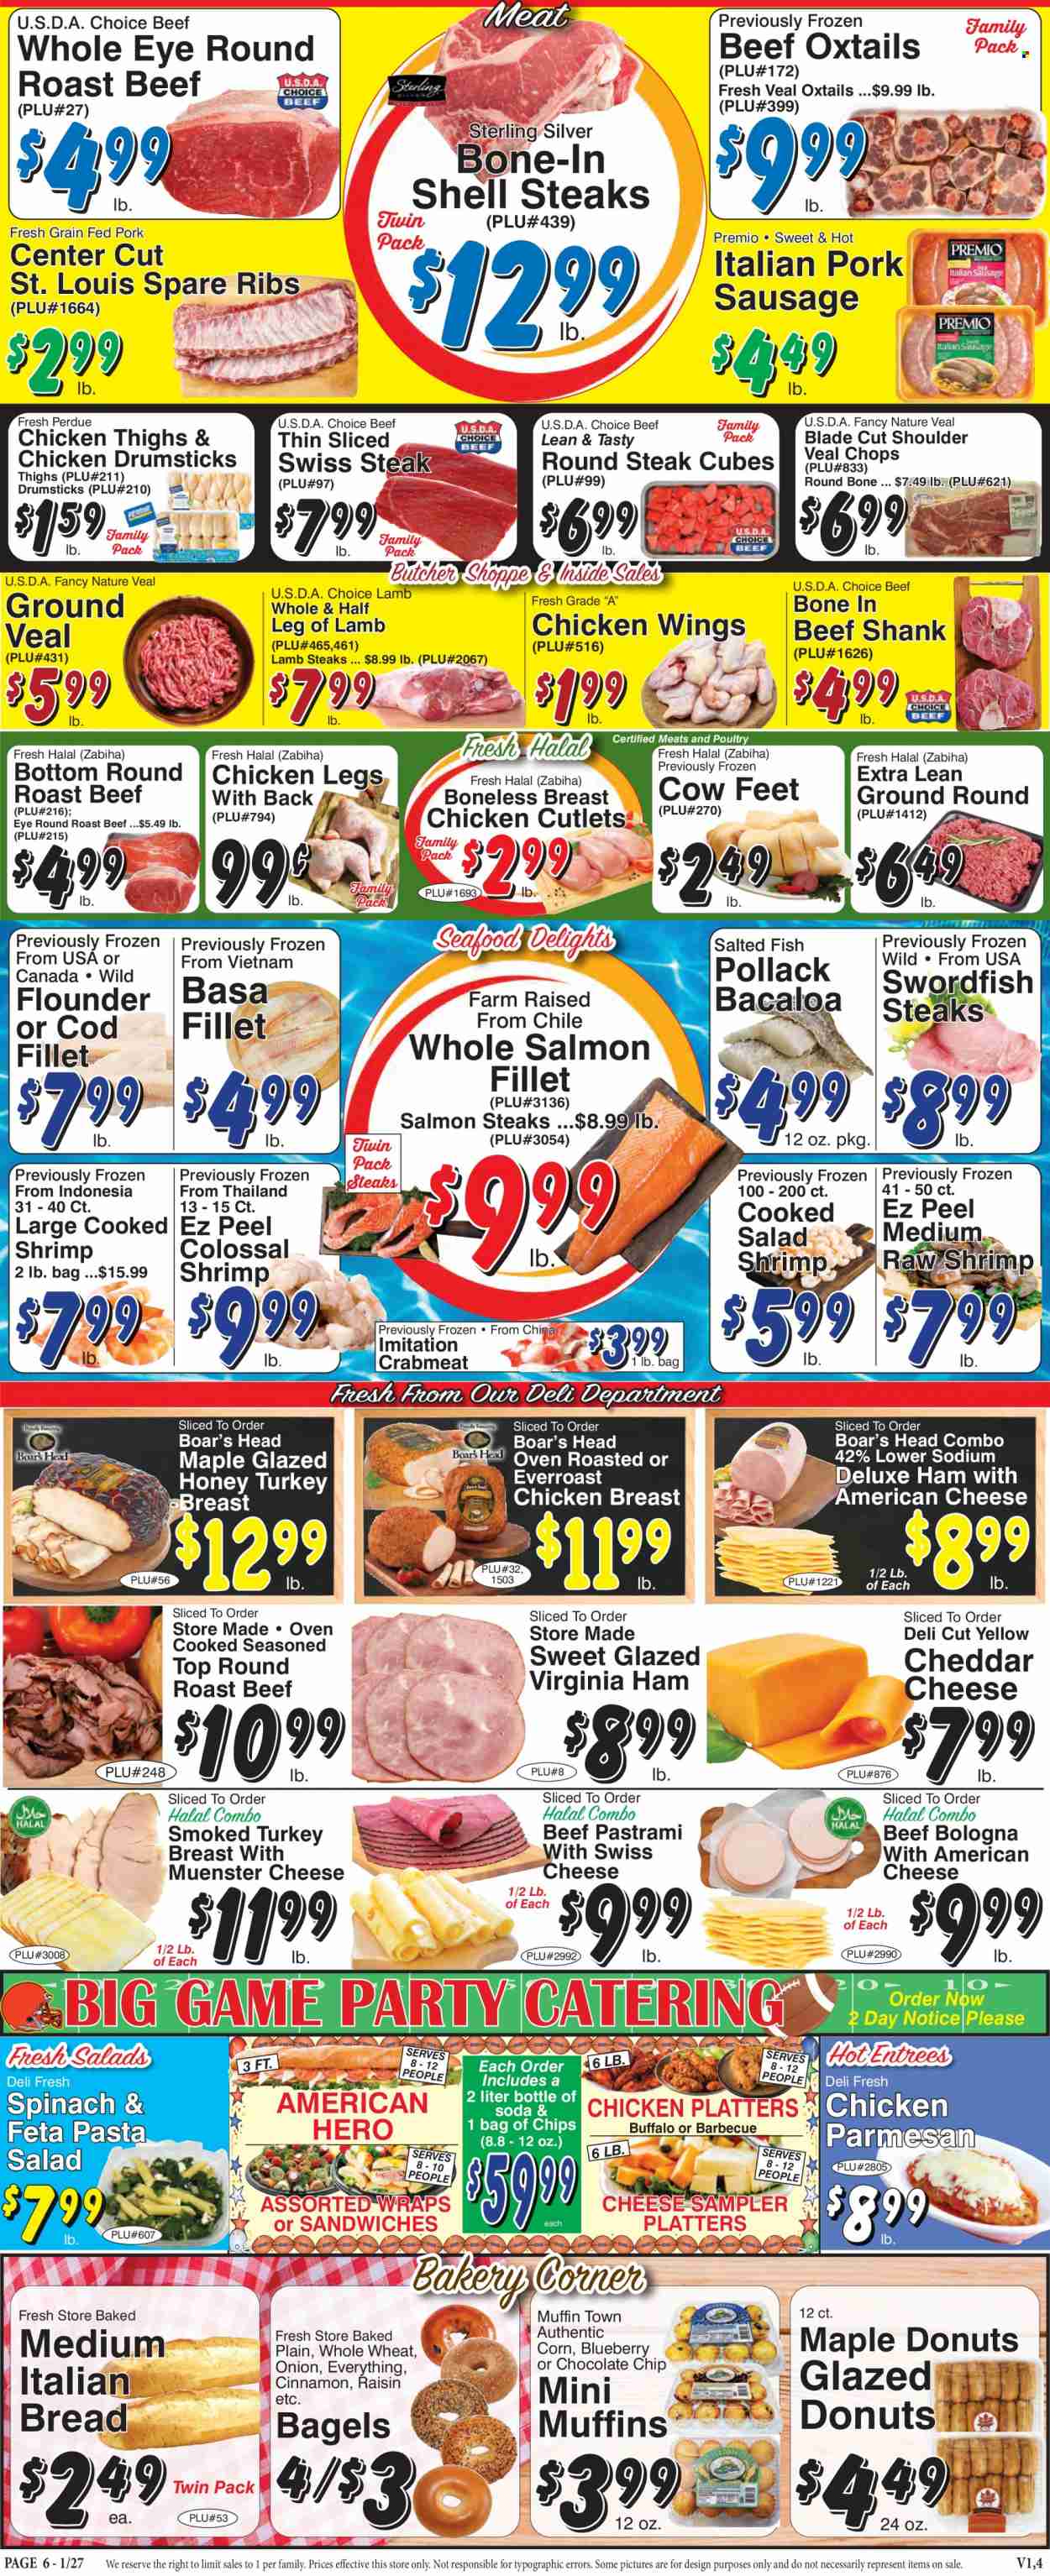 thumbnail - Trade Fair Supermarket Flyer - 01/27/2023 - 02/02/2023 - Sales products - bagels, bread, wraps, donut, muffin, onion, cod, crab meat, flounder, salmon, salmon fillet, swordfish, pollock, seafood, fish, shrimps, sandwich, pasta, Perdue®, ham, pastrami, bologna sausage, virginia ham, sausage, pork sausage, pasta salad, american cheese, cheese, Münster cheese, chicken wings, cinnamon, soda, chicken breasts, chicken cutlets, chicken legs, chicken thighs, chicken drumsticks, beef meat, beef shank, ground veal, veal cutlet, veal meat, steak, round roast, round steak, roast beef, sirloin steak, ribs, pork spare ribs, lamb leg. Page 6.